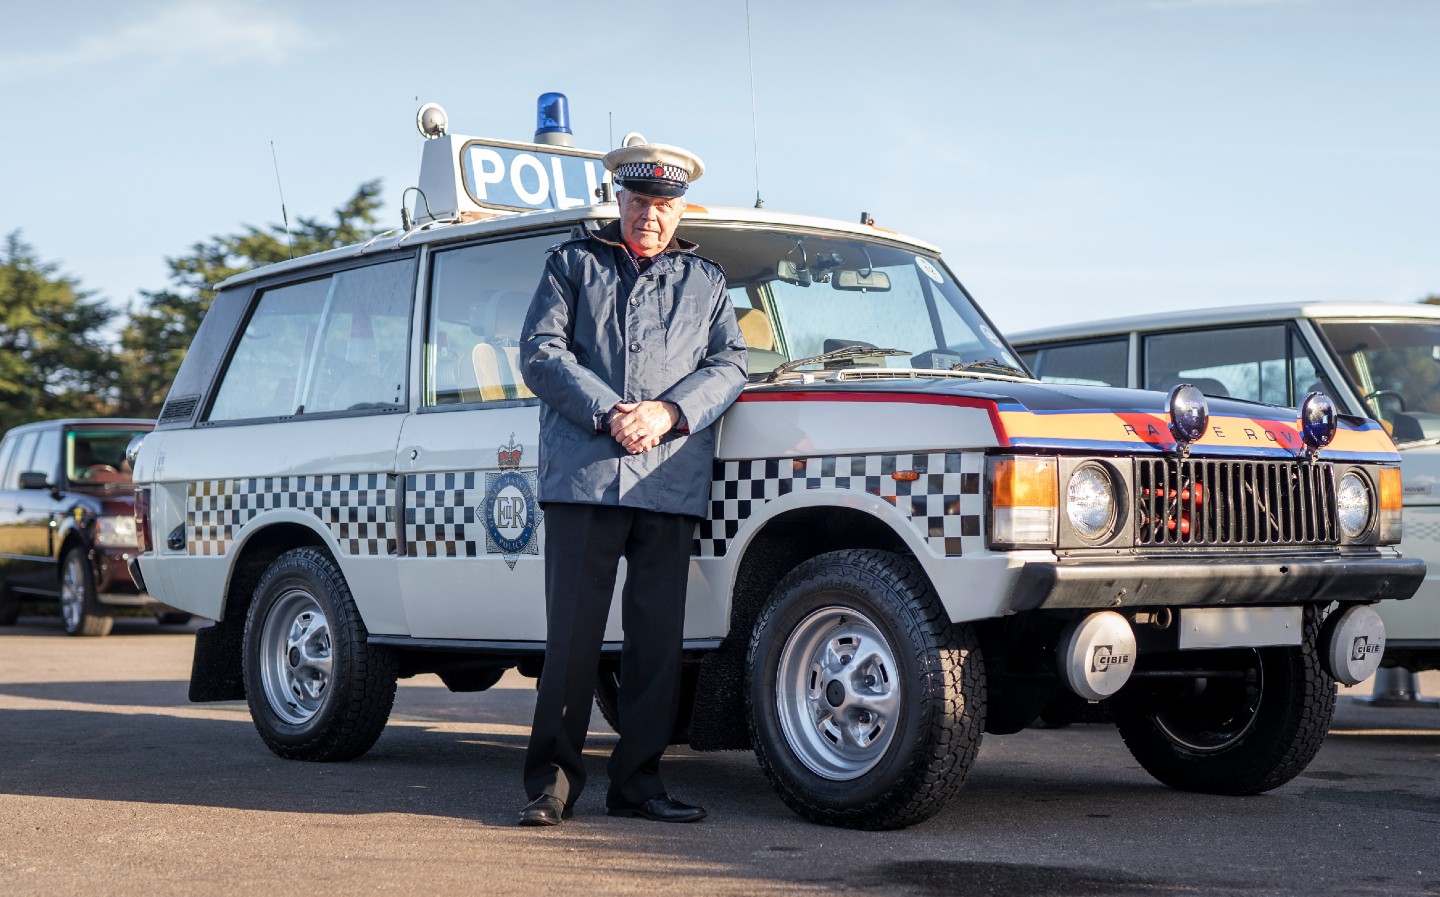 Range Rover fiftieth anniversary: From a Royal Rangie to one bought by a member of Queen, meet the star cars and their owners - Richard Beddal's Police Range Rover